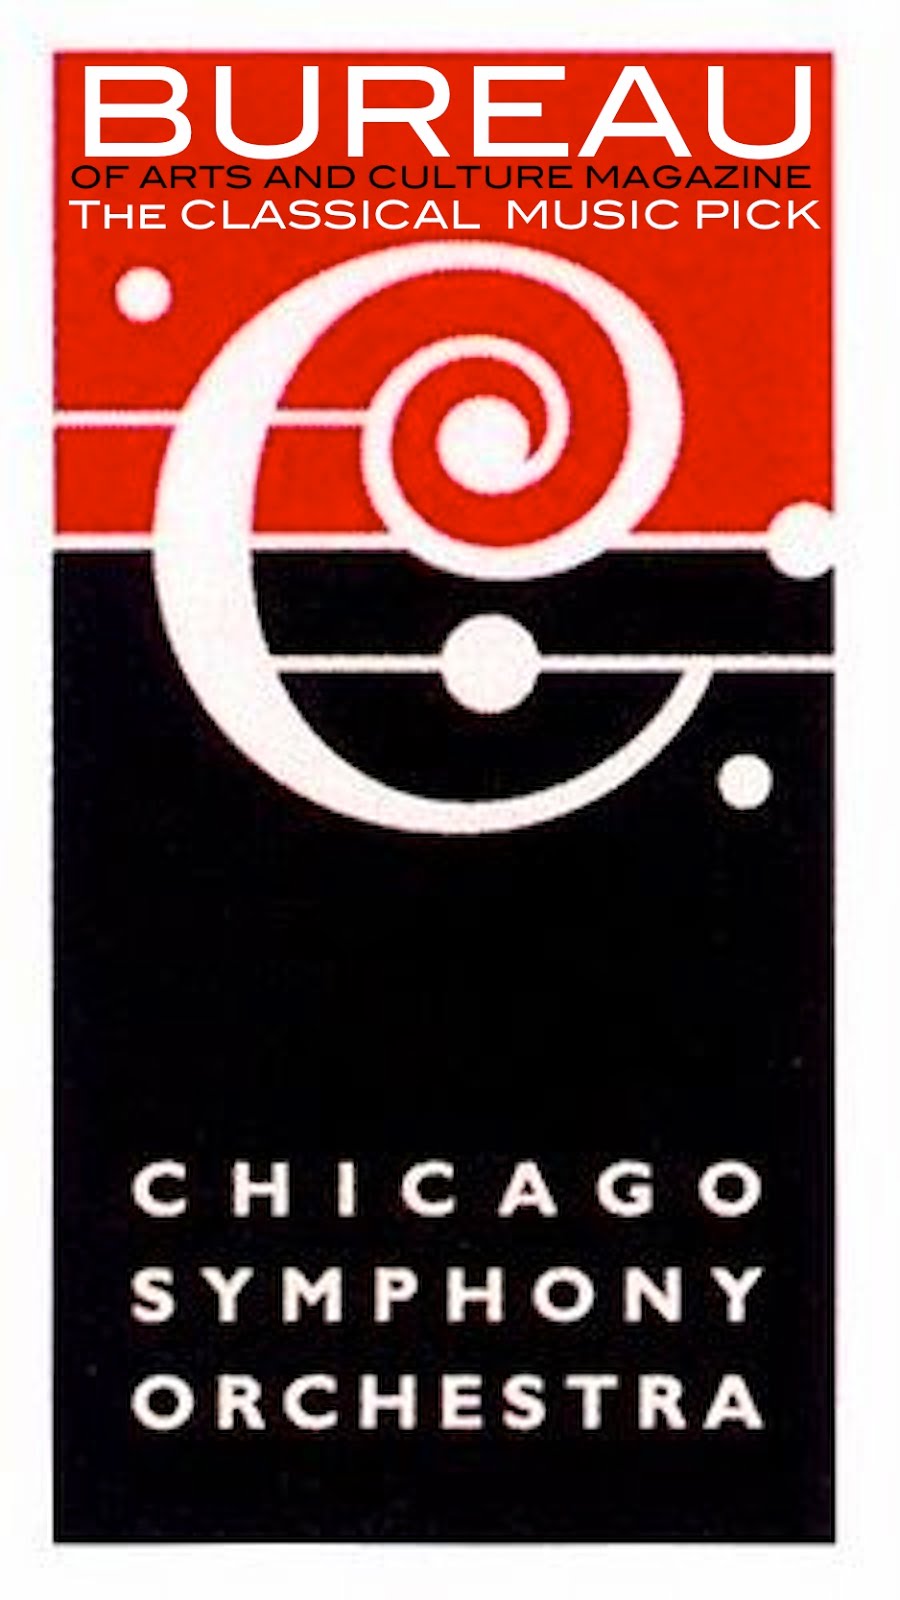 The CHICAGO SYMPHONY